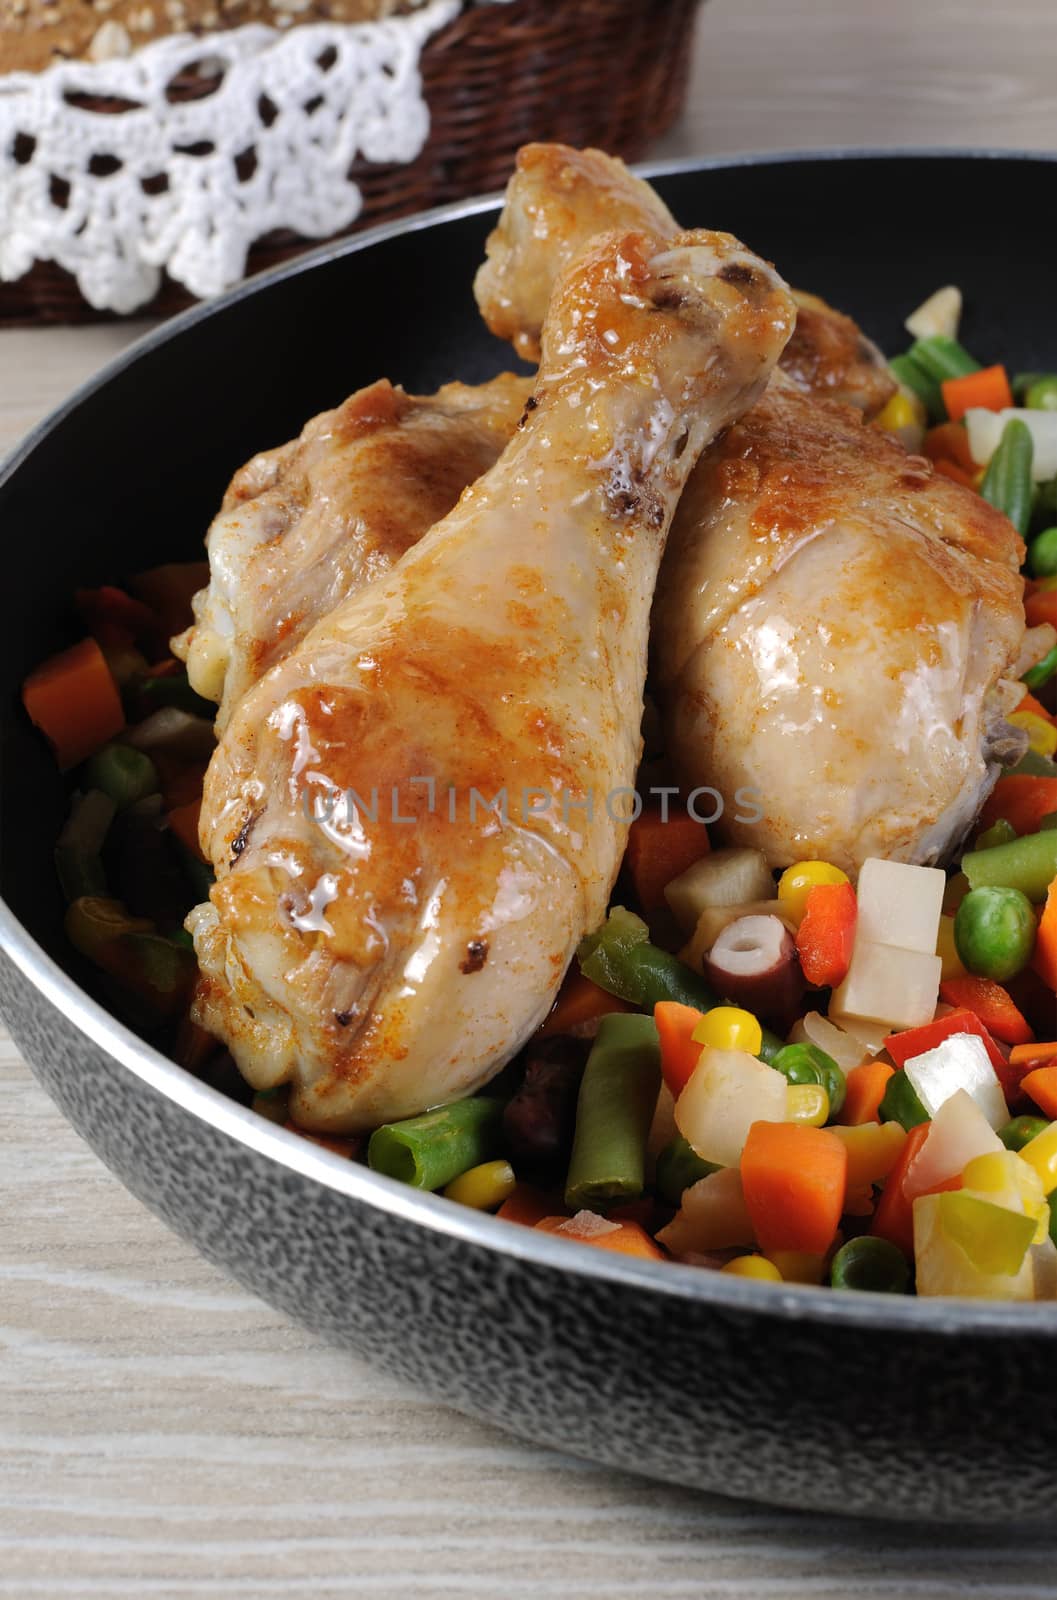 Roasted chicken drumstick with vegetables by Apolonia